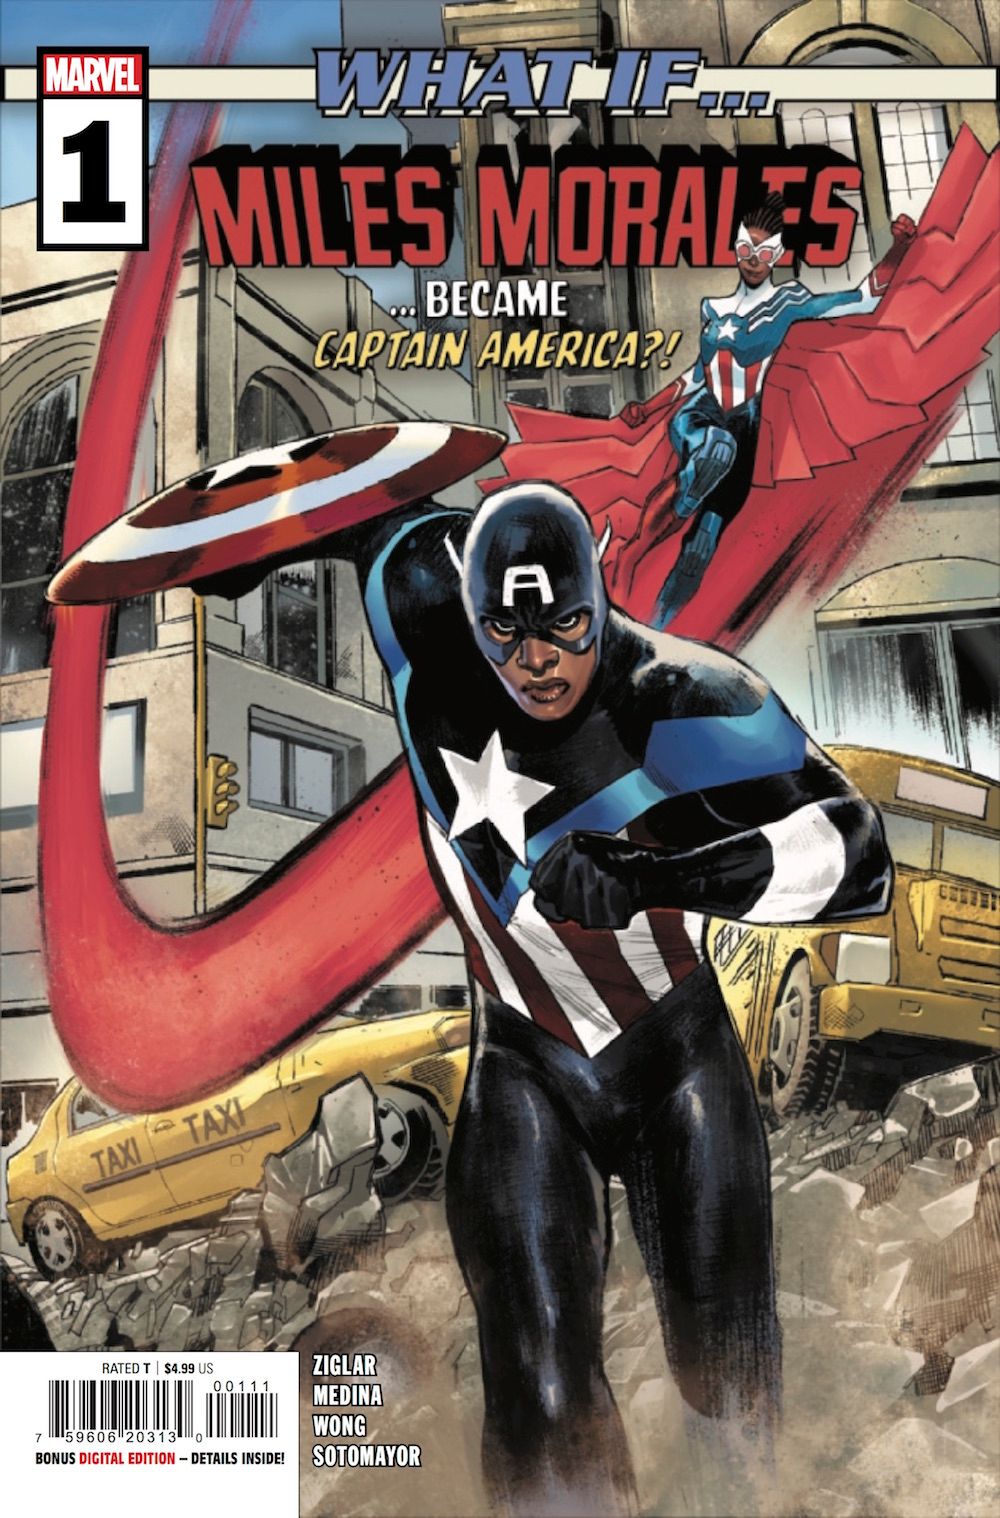 What-If-Miles-Morales-Became-Captain-America-Cover.jpg